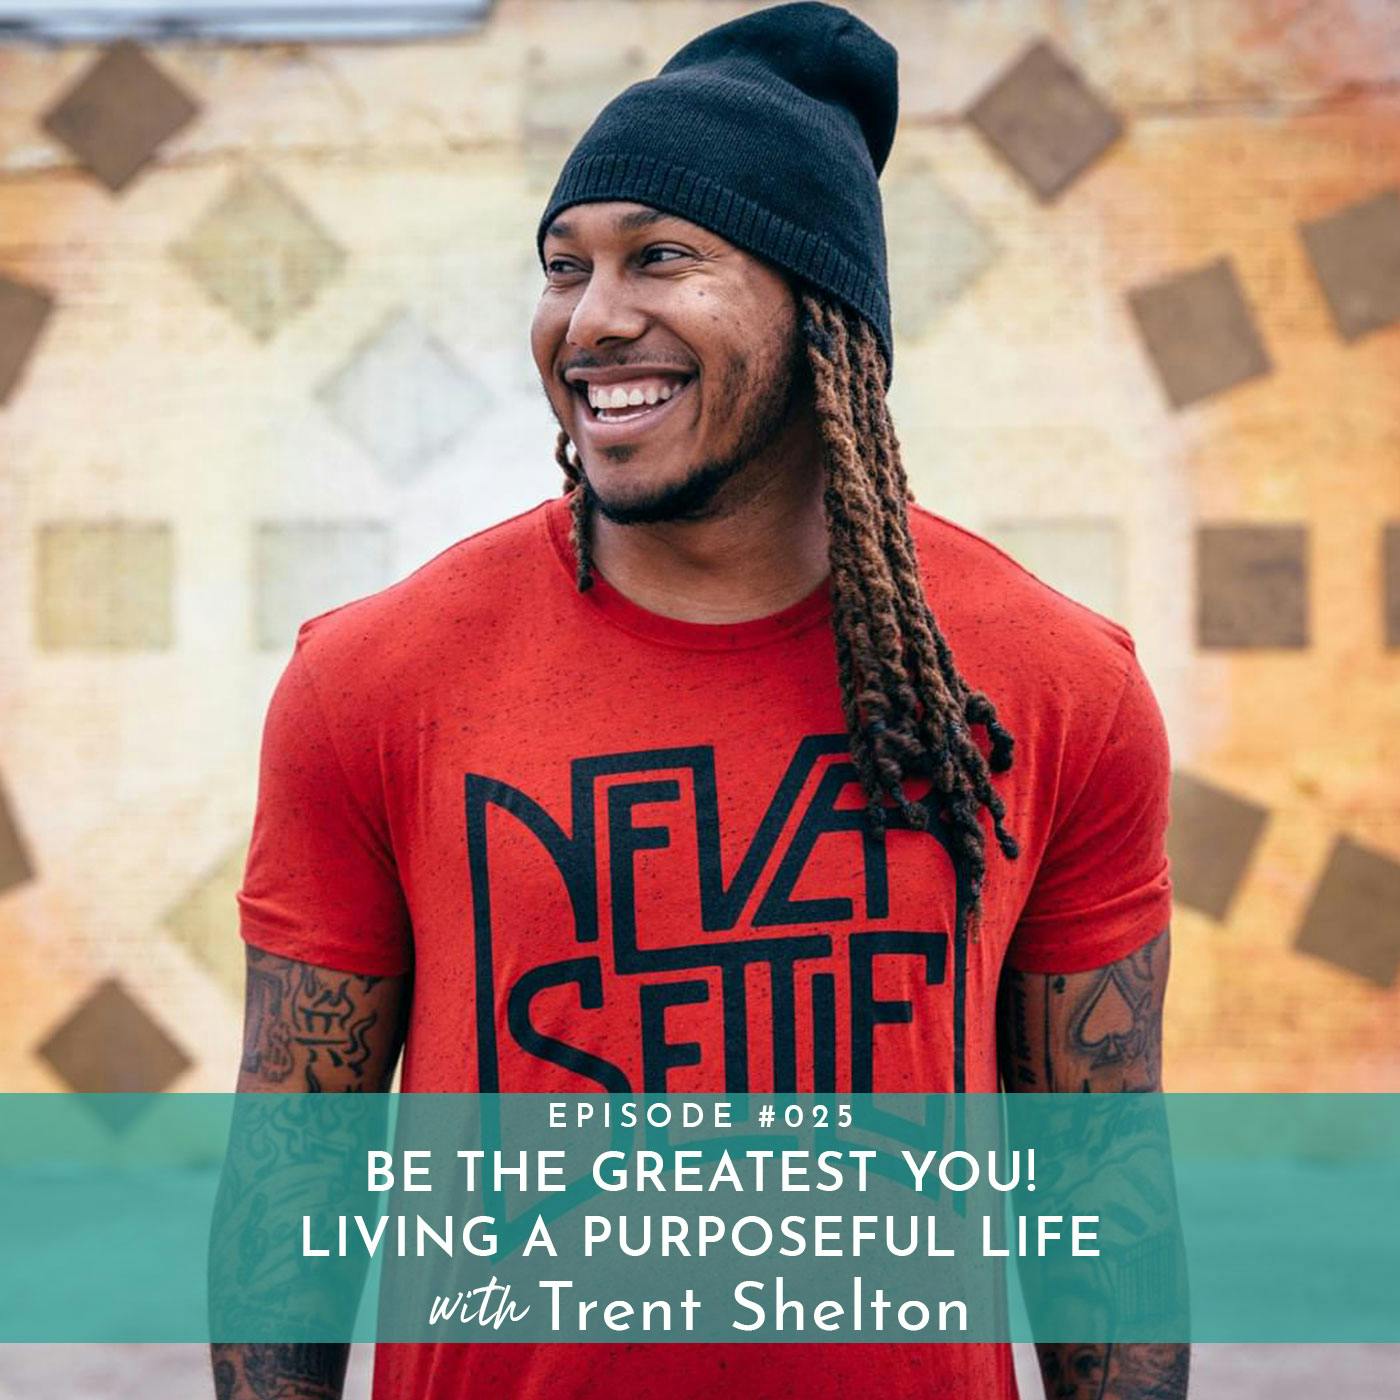 Be The Greatest You! Living a Purposeful Life with Trent Shelton